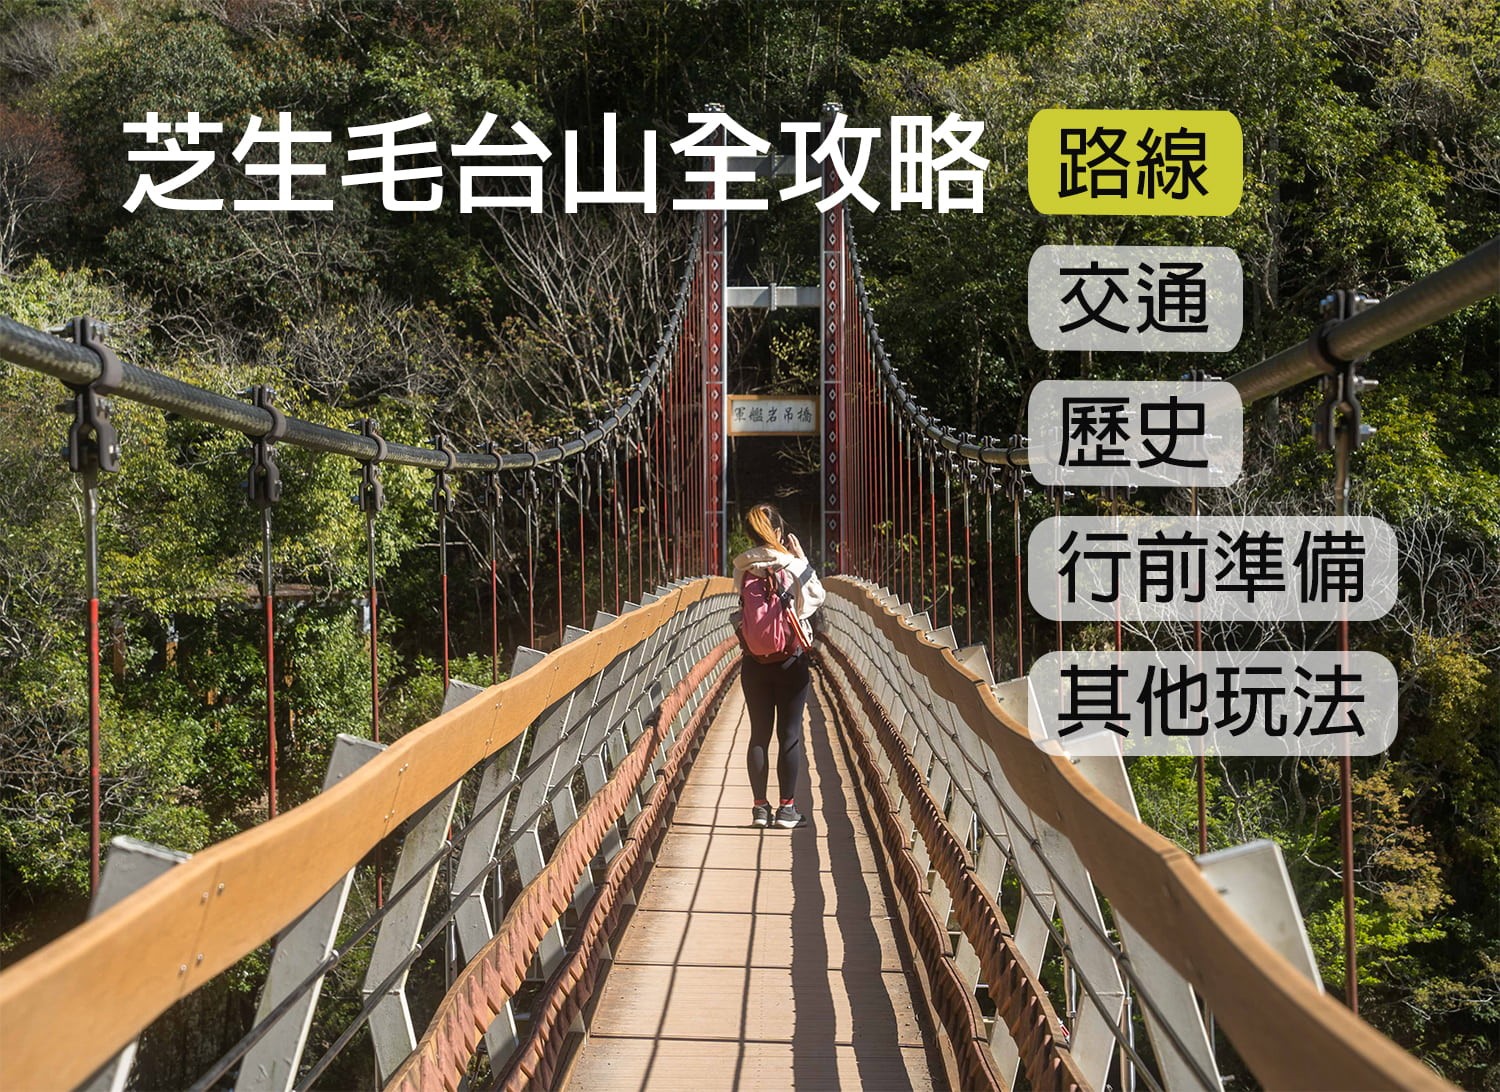 "Hsinchu Secret" Zhisheng Maotai Mountain Trail｜Climbing, maple viewing, bathing, and camping will make you satisfied at one time